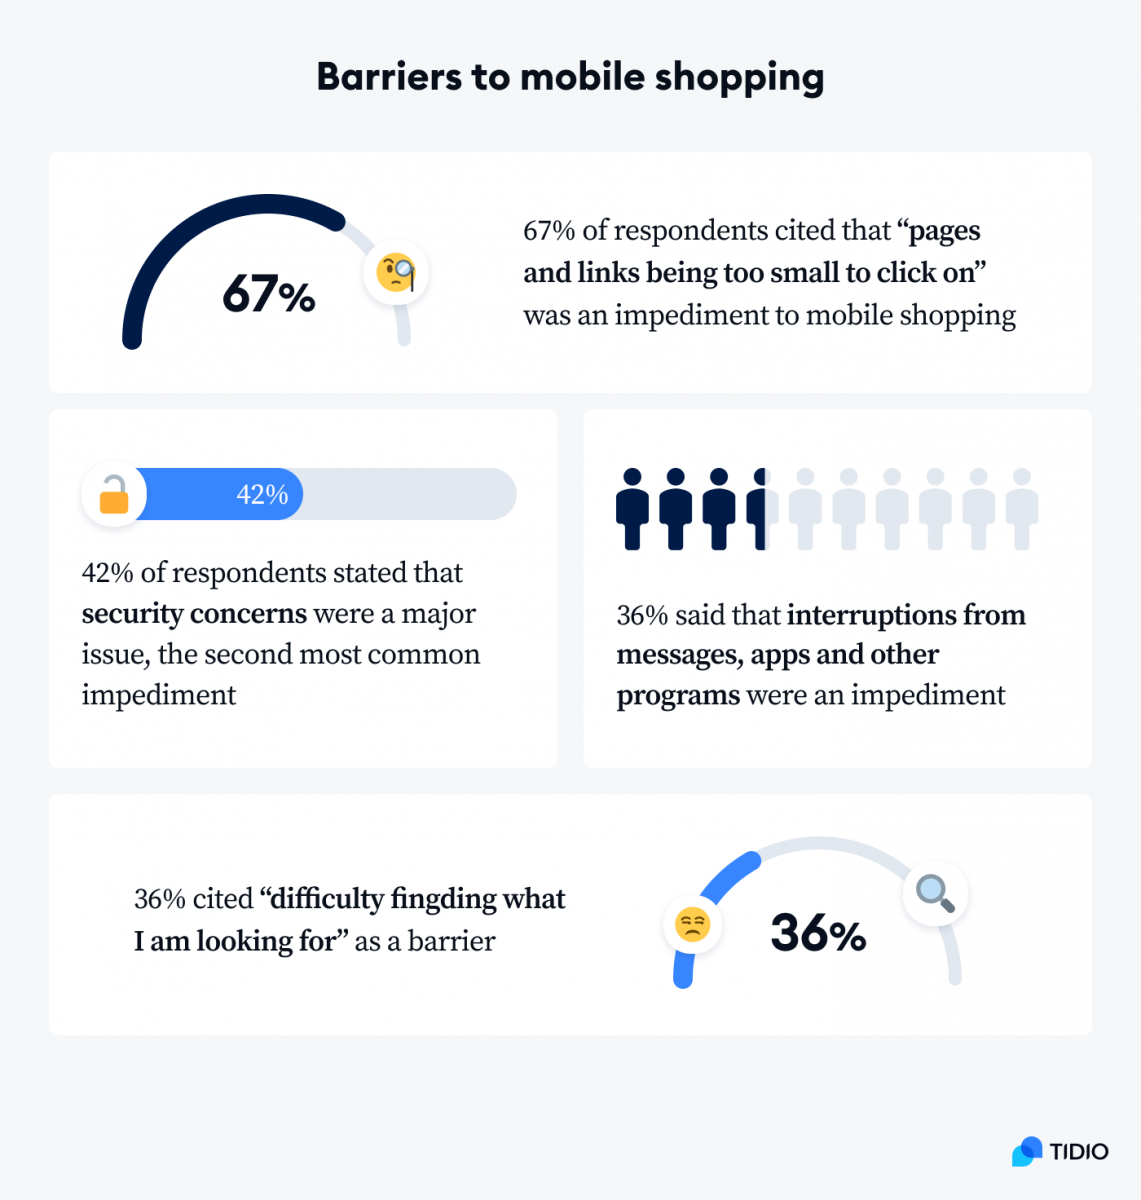 An infographic showing 4 statistics about barriers to mobile shopping